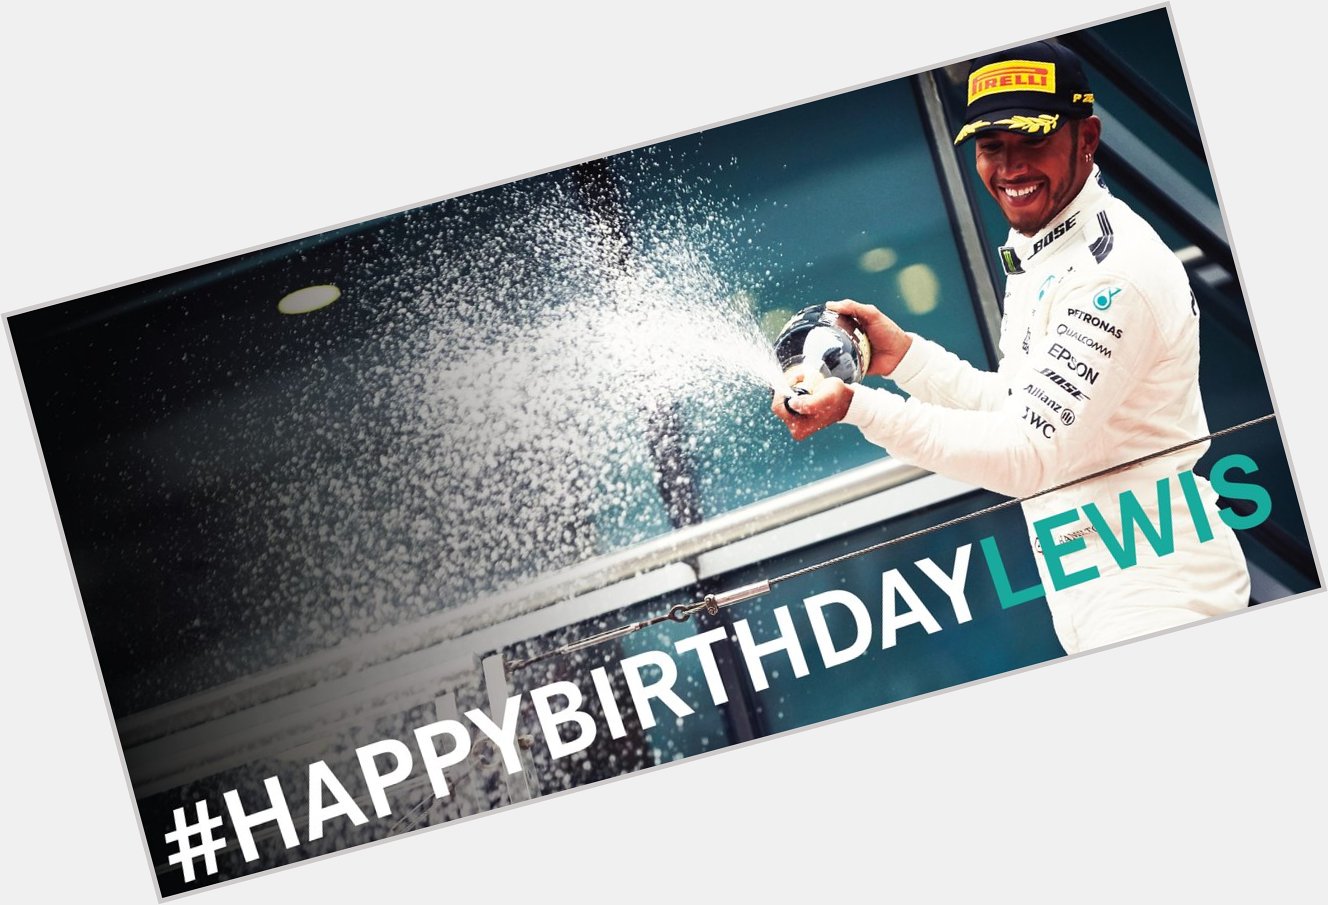 Happy Birthday Lewis Hamilton
Go for the title in2018  